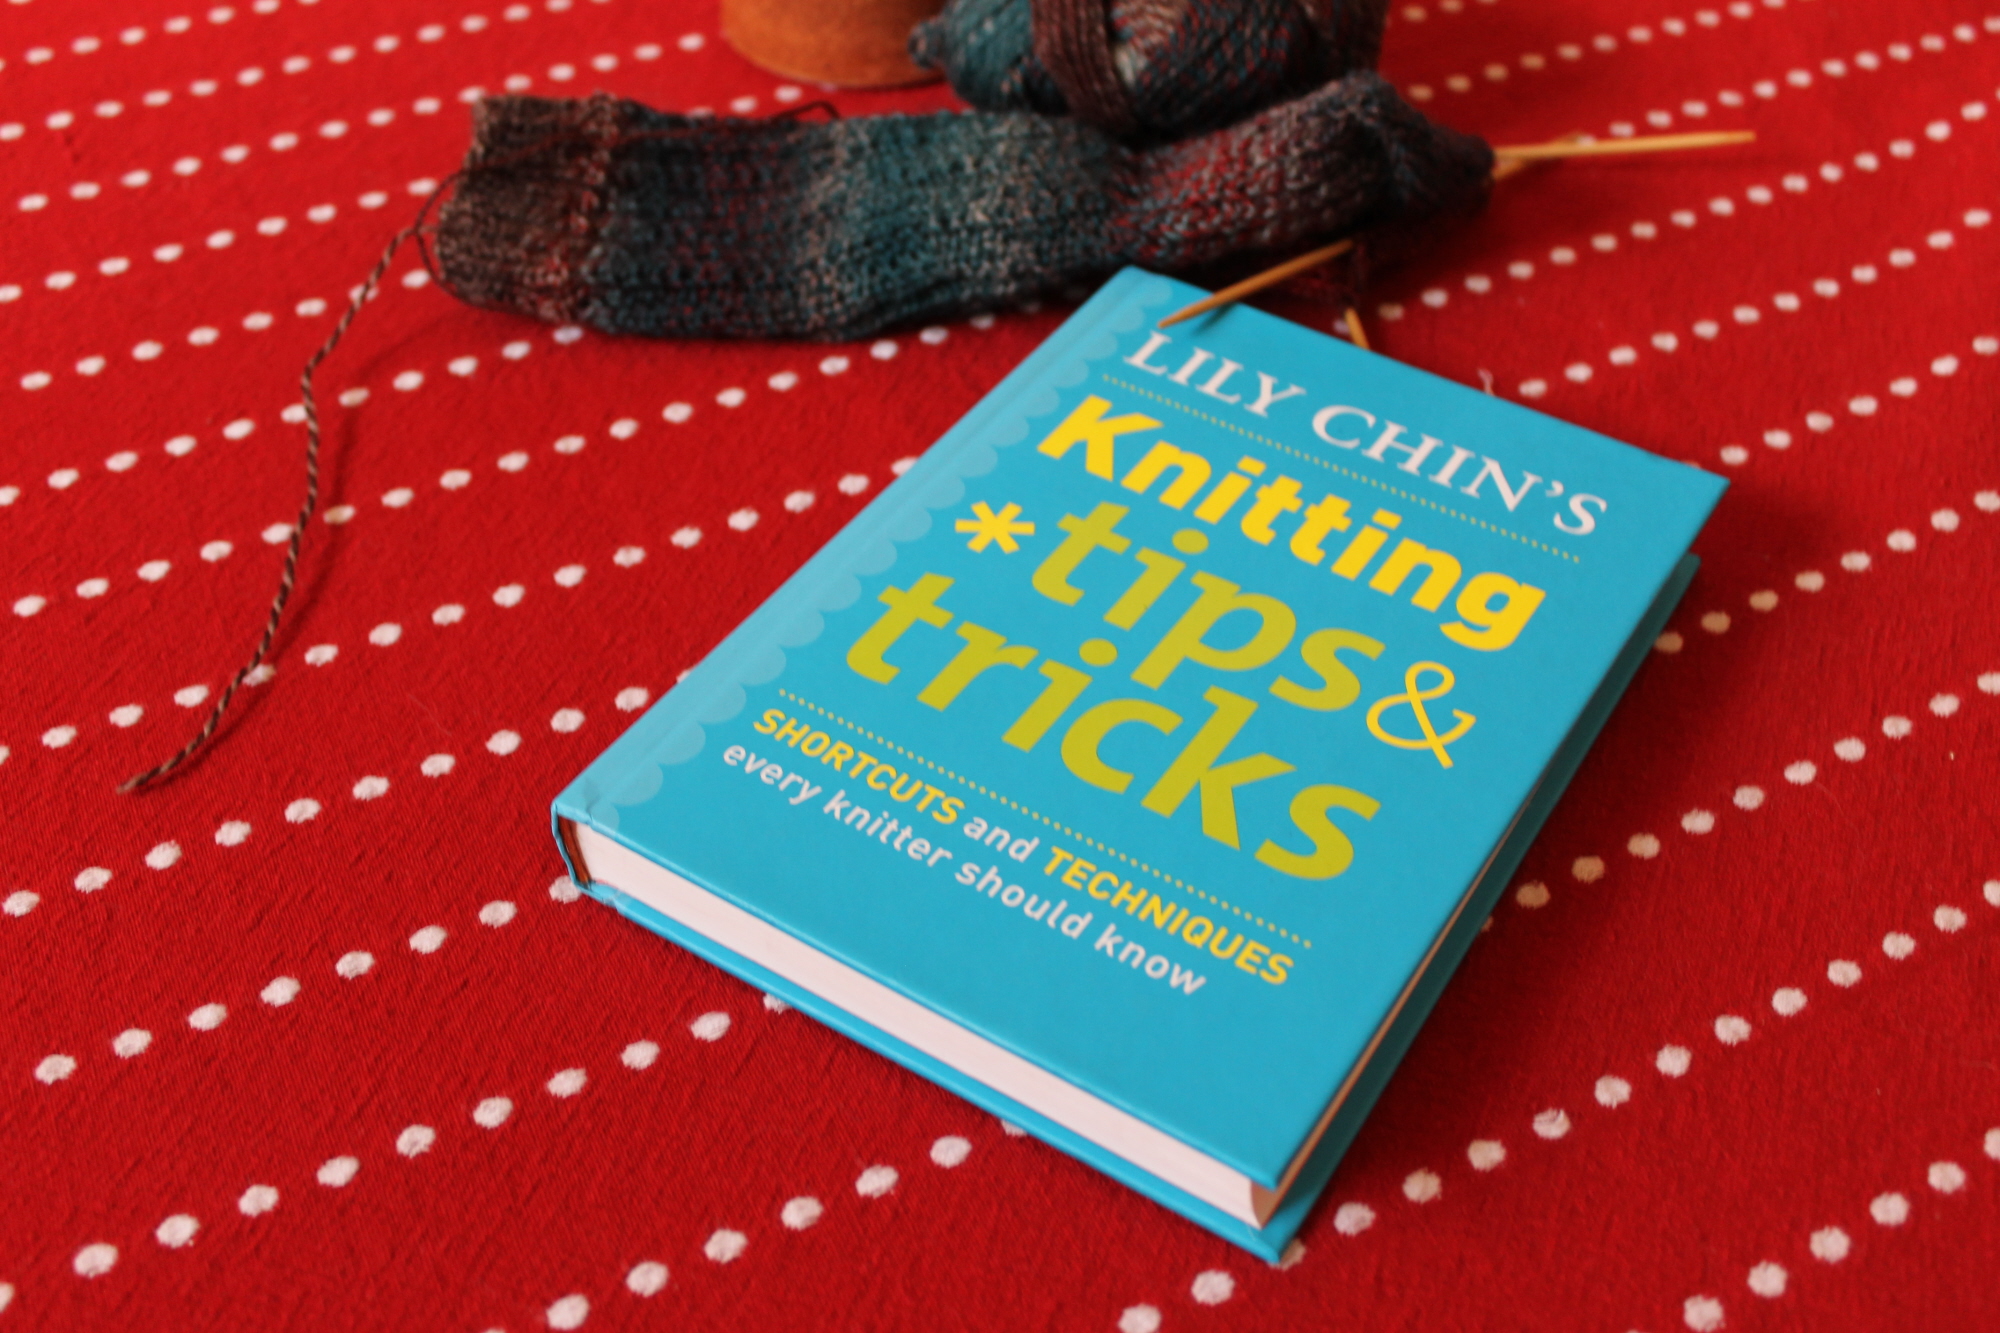 Lily Chin's Knitting Tips and Tricks book